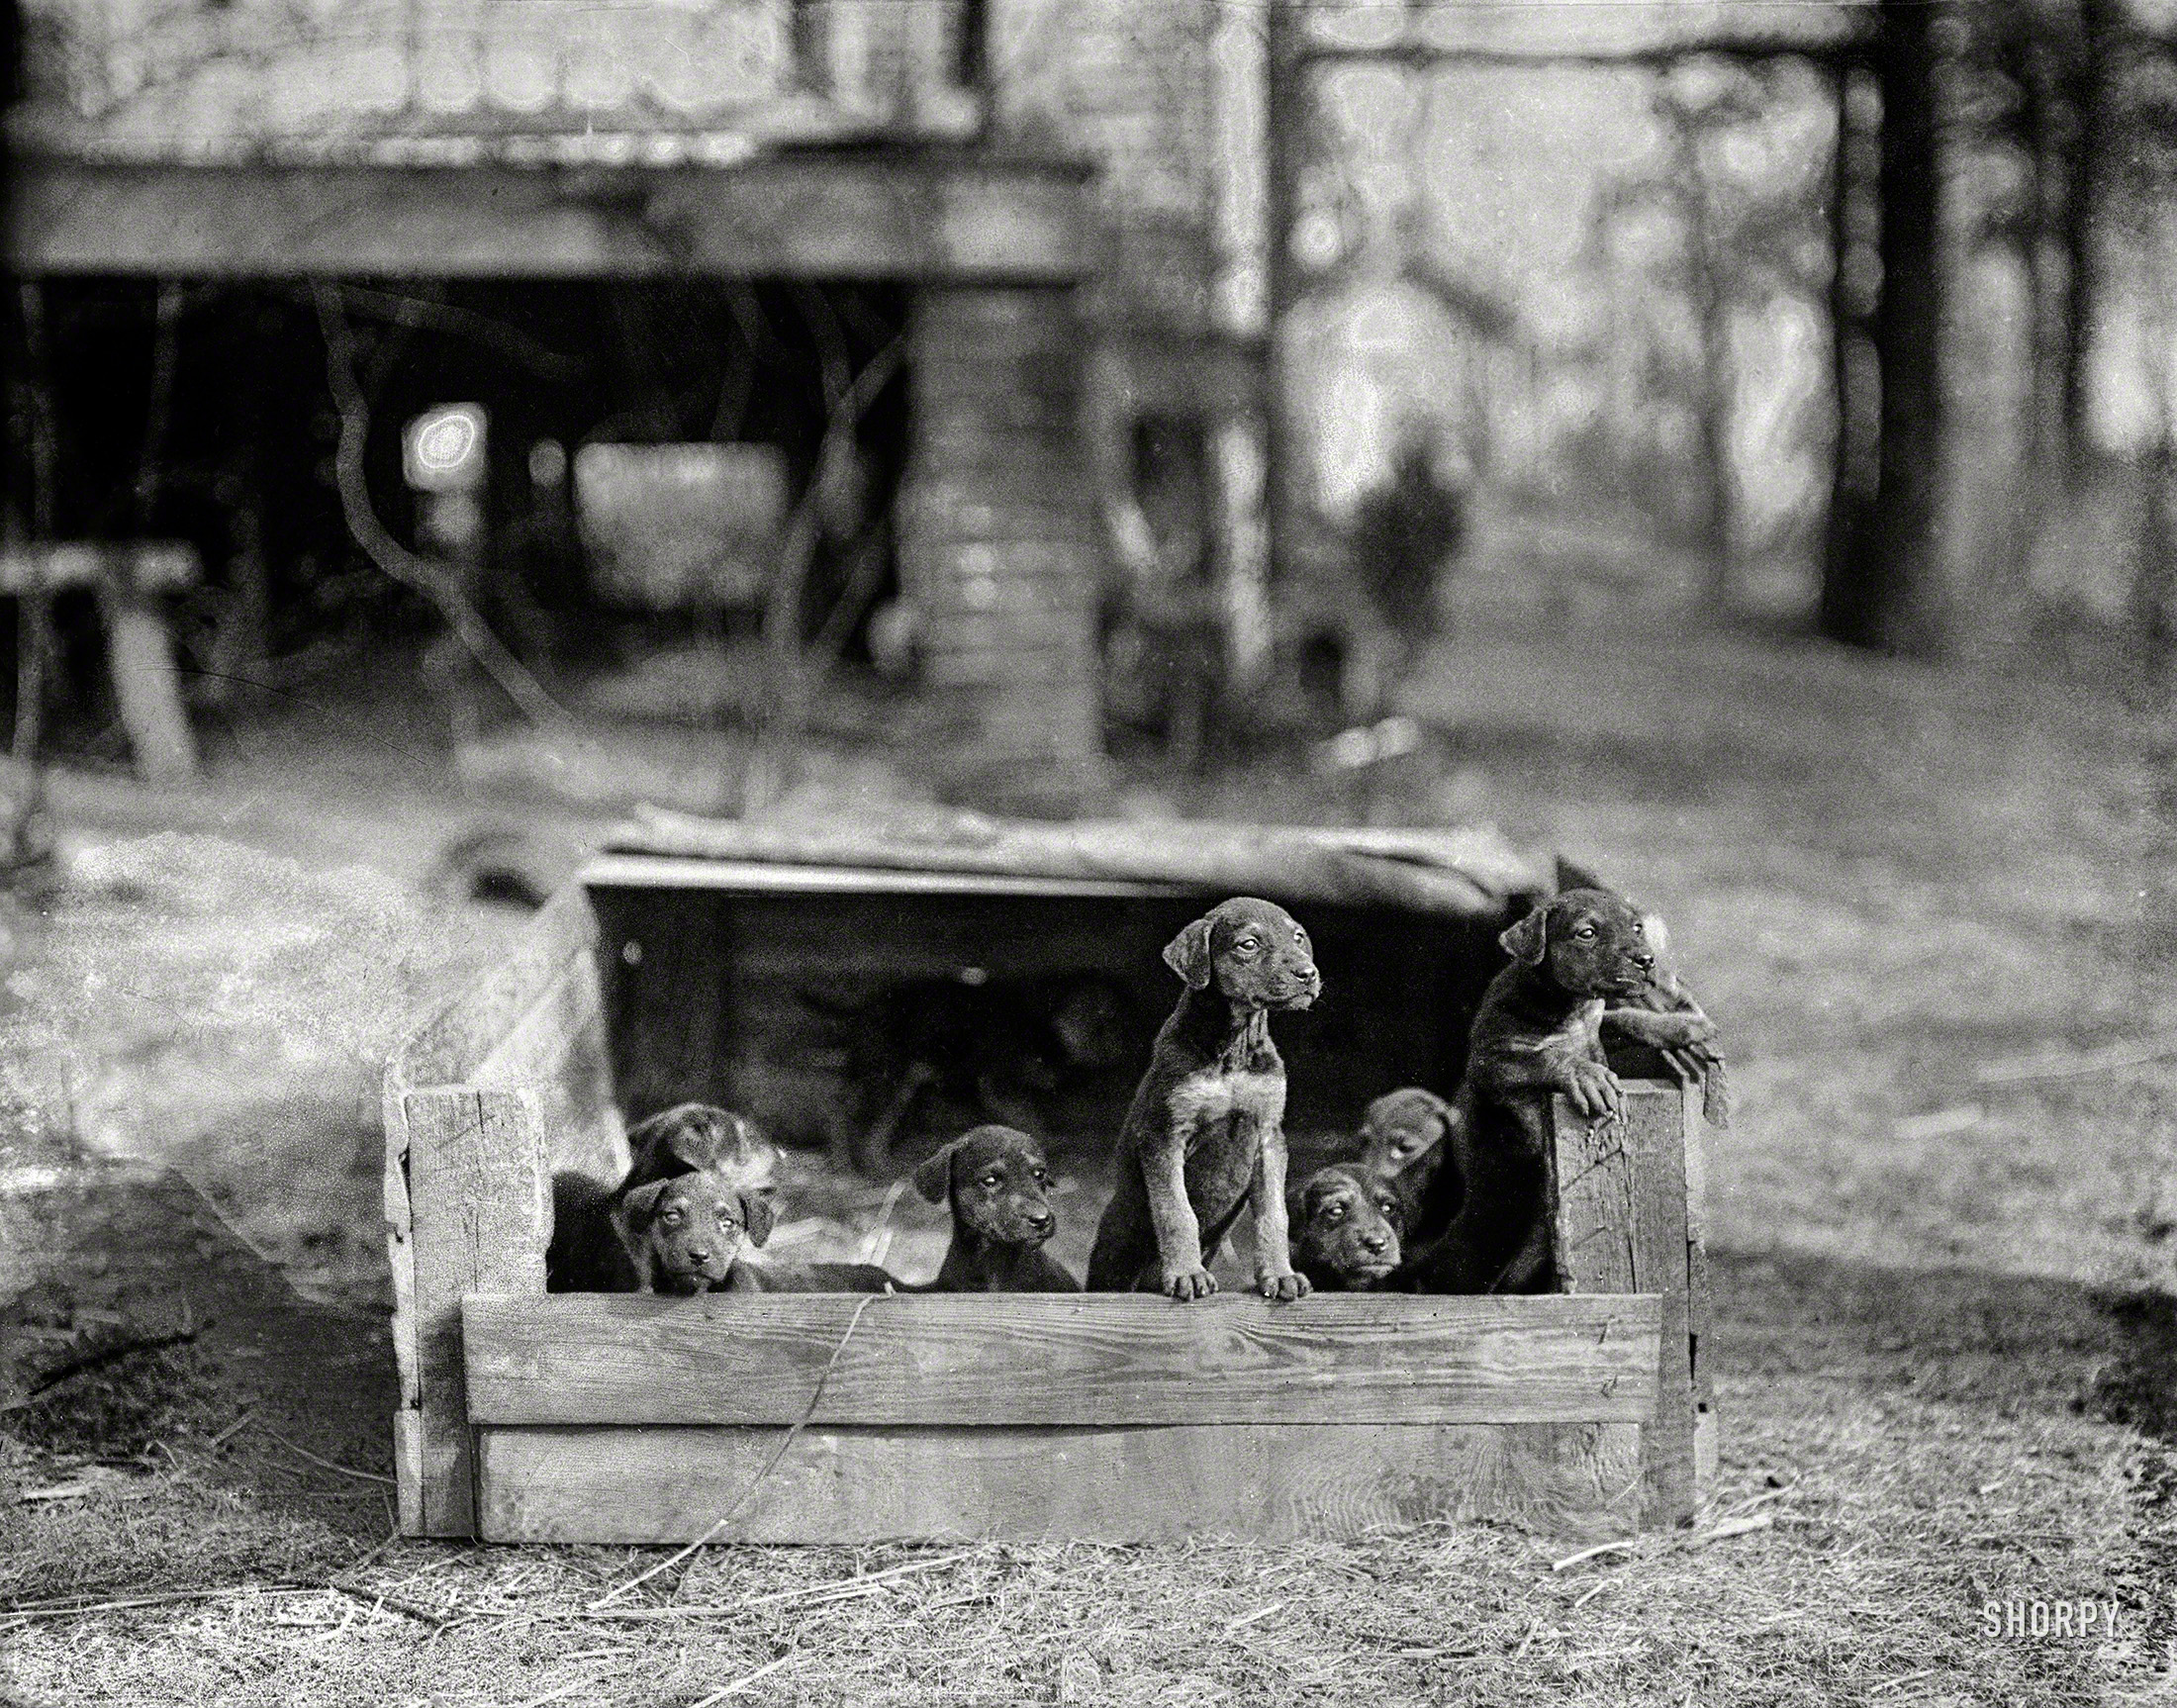 February 1923. Washington, D.C., or vicinity. "Puppies." Probably poky. Lovably little. Harris & Ewing Collection glass negative. View full size.